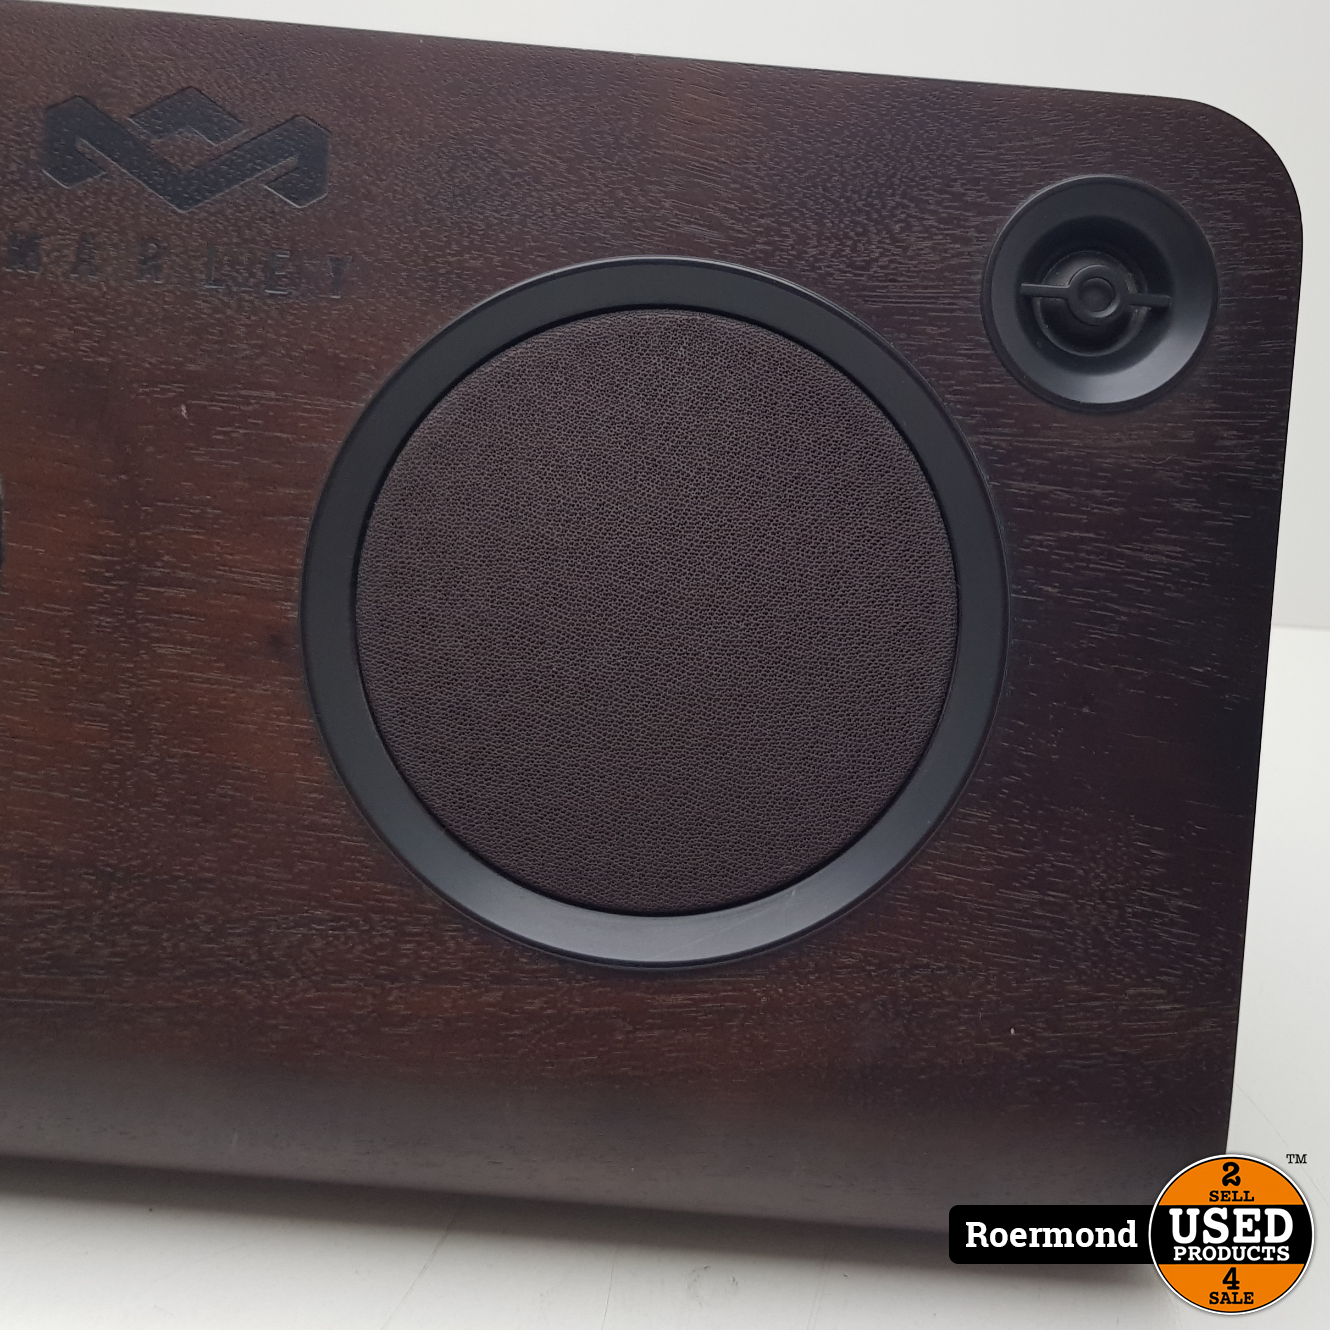 House of Marley Get Stand Bluetooth Speaker Used Roermond